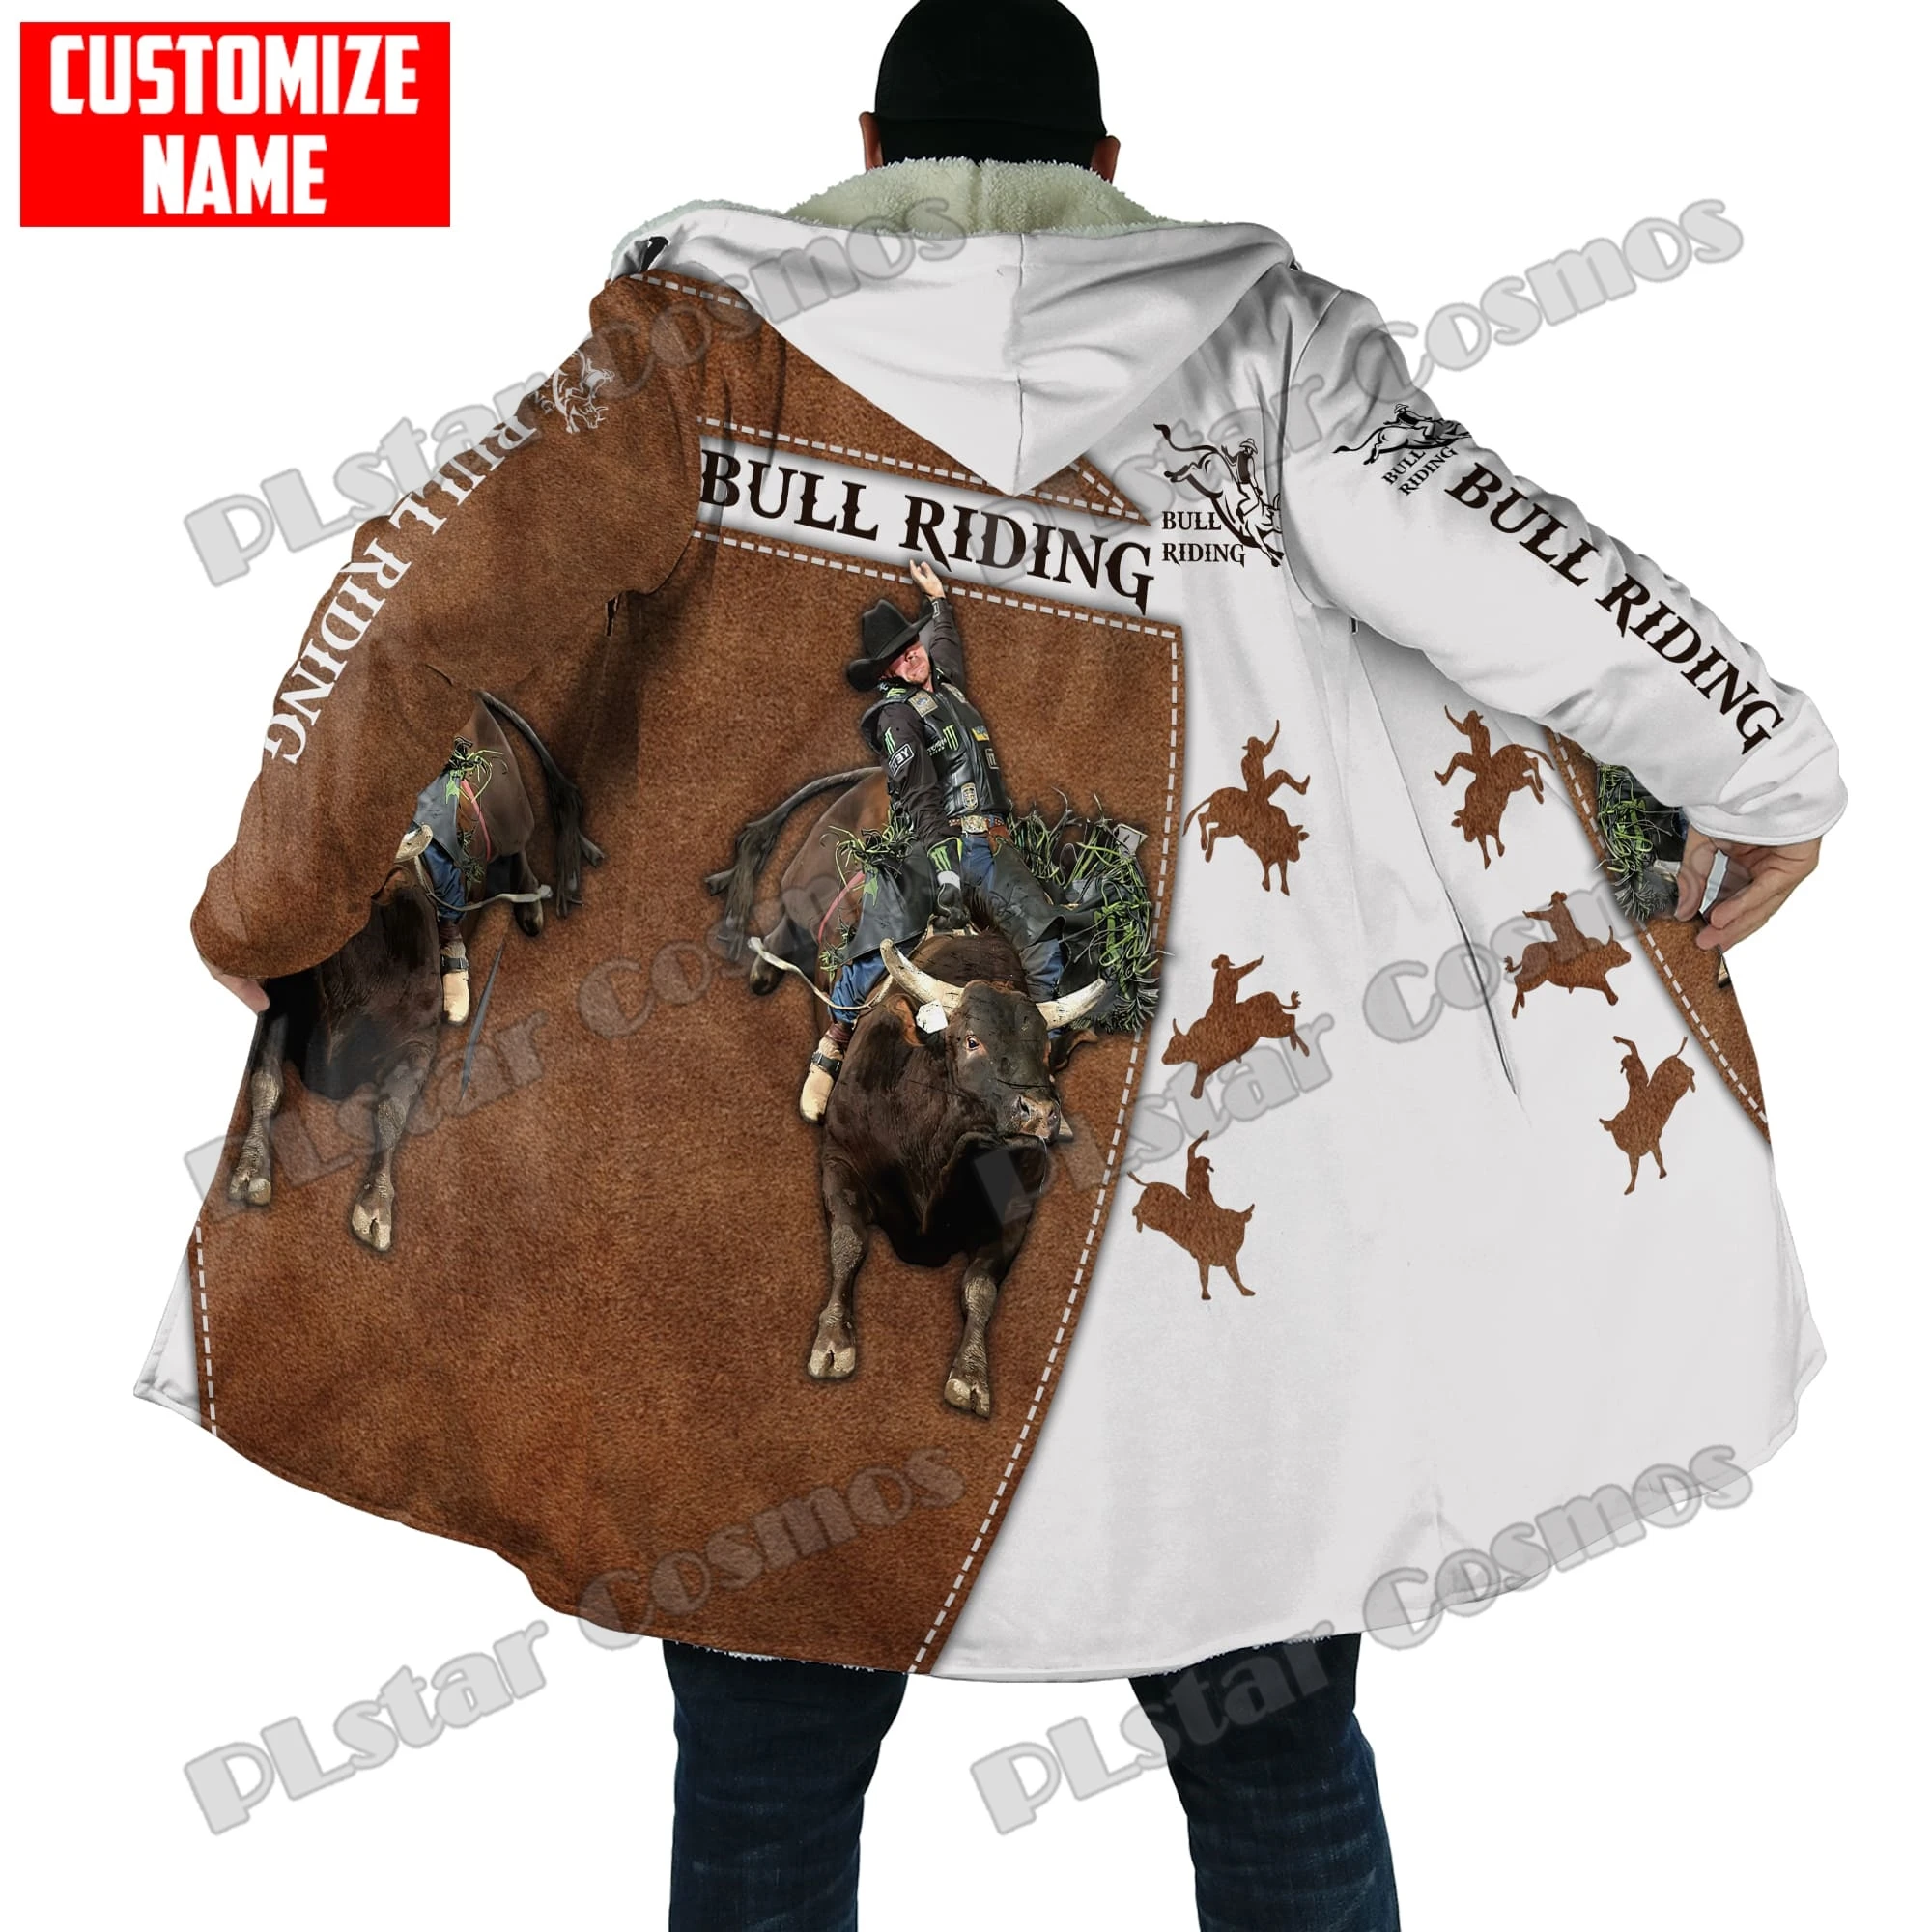 Winter Fashion Mens Cloak Personalized Name Bull Riding 3D Printed Fleece Hooded cloak Unisex Casual Thick Warm Cape coat PJ08 unisex m moschinos bear christmas bandana merch neck cover printed face scarf multifunctional balaclava for riding washable